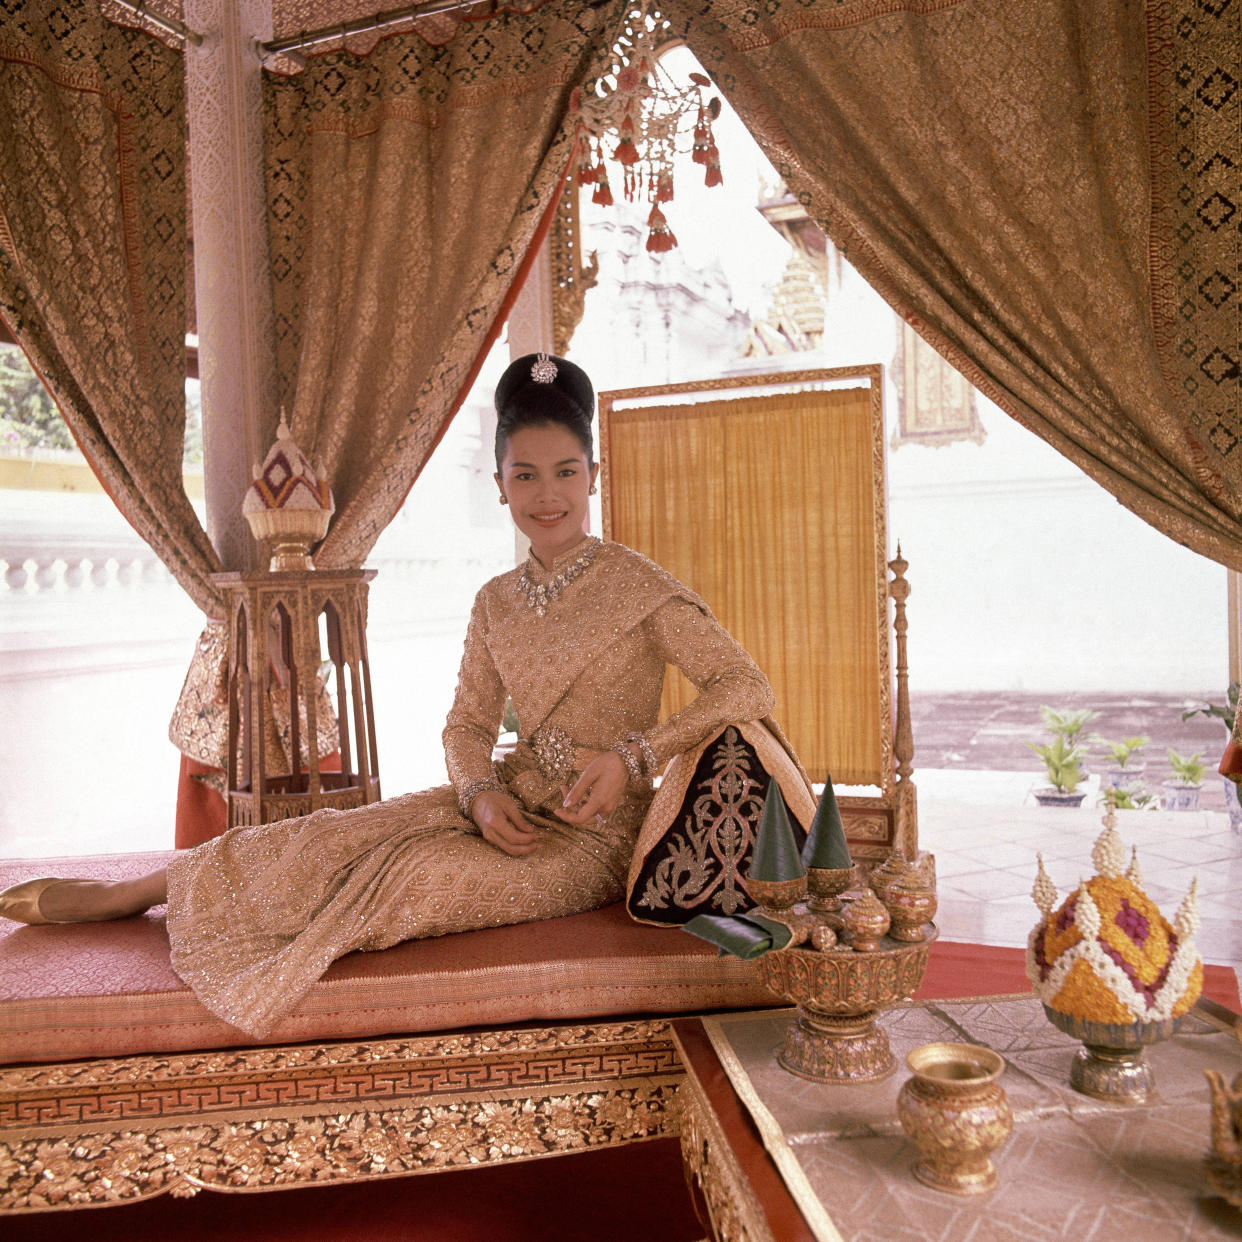 H.M. Queen Sirikit, seated on gold leafed bed in the King's coronation pavilion, wearing a dress of twenty-carat gold embossed crystal, with diamonds, which she wore to the Greek Royal wedding and was designed for her by Pierre Balmain, and diamond and gold jewelry. (Photo by Henry Clarke/Condé Nast via Getty Images)